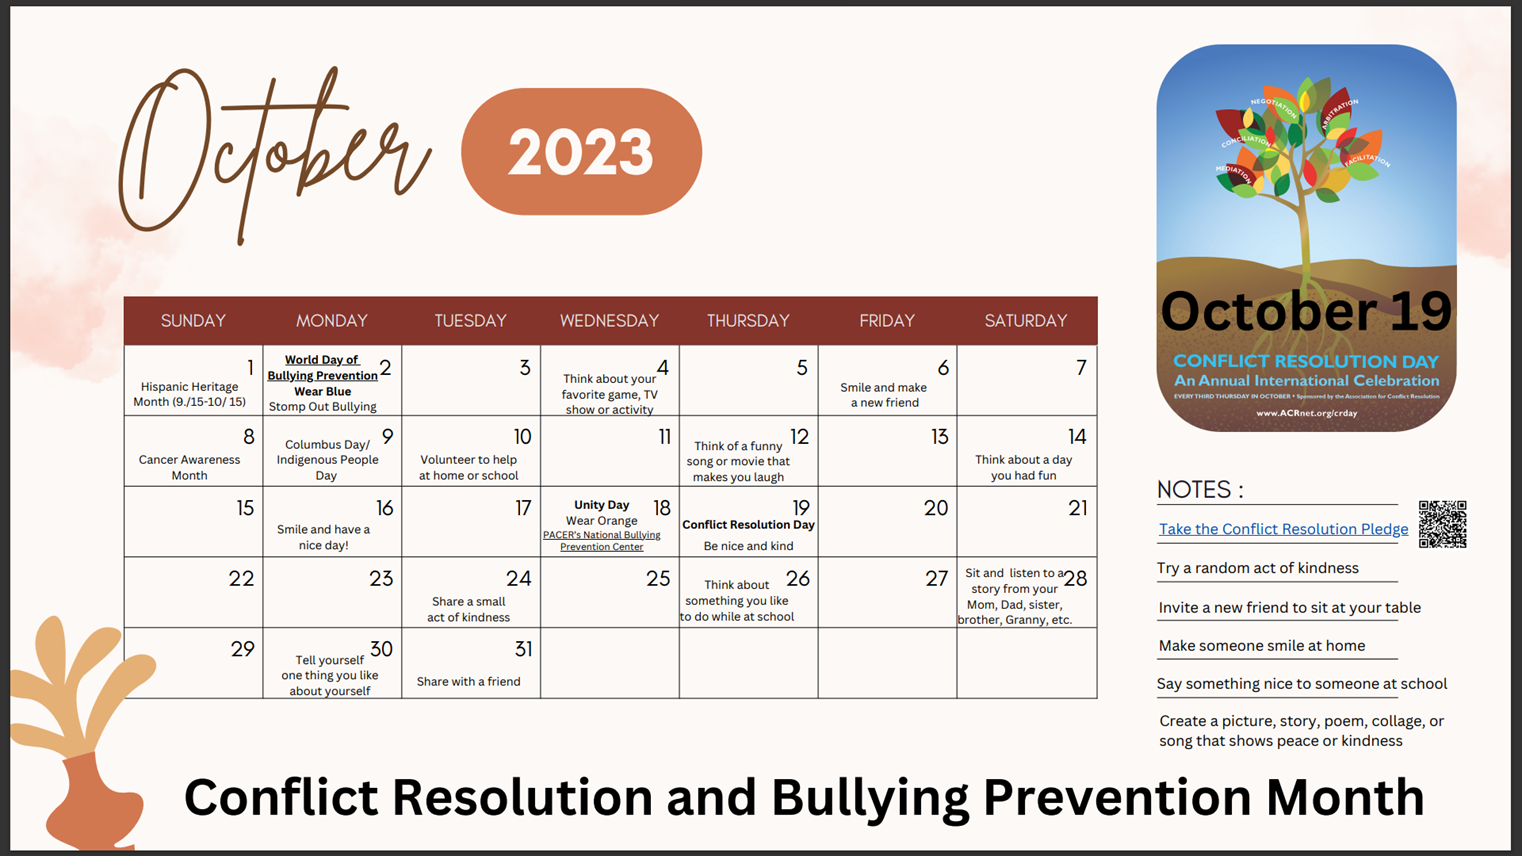 Conflict Resolution Month - October 2023